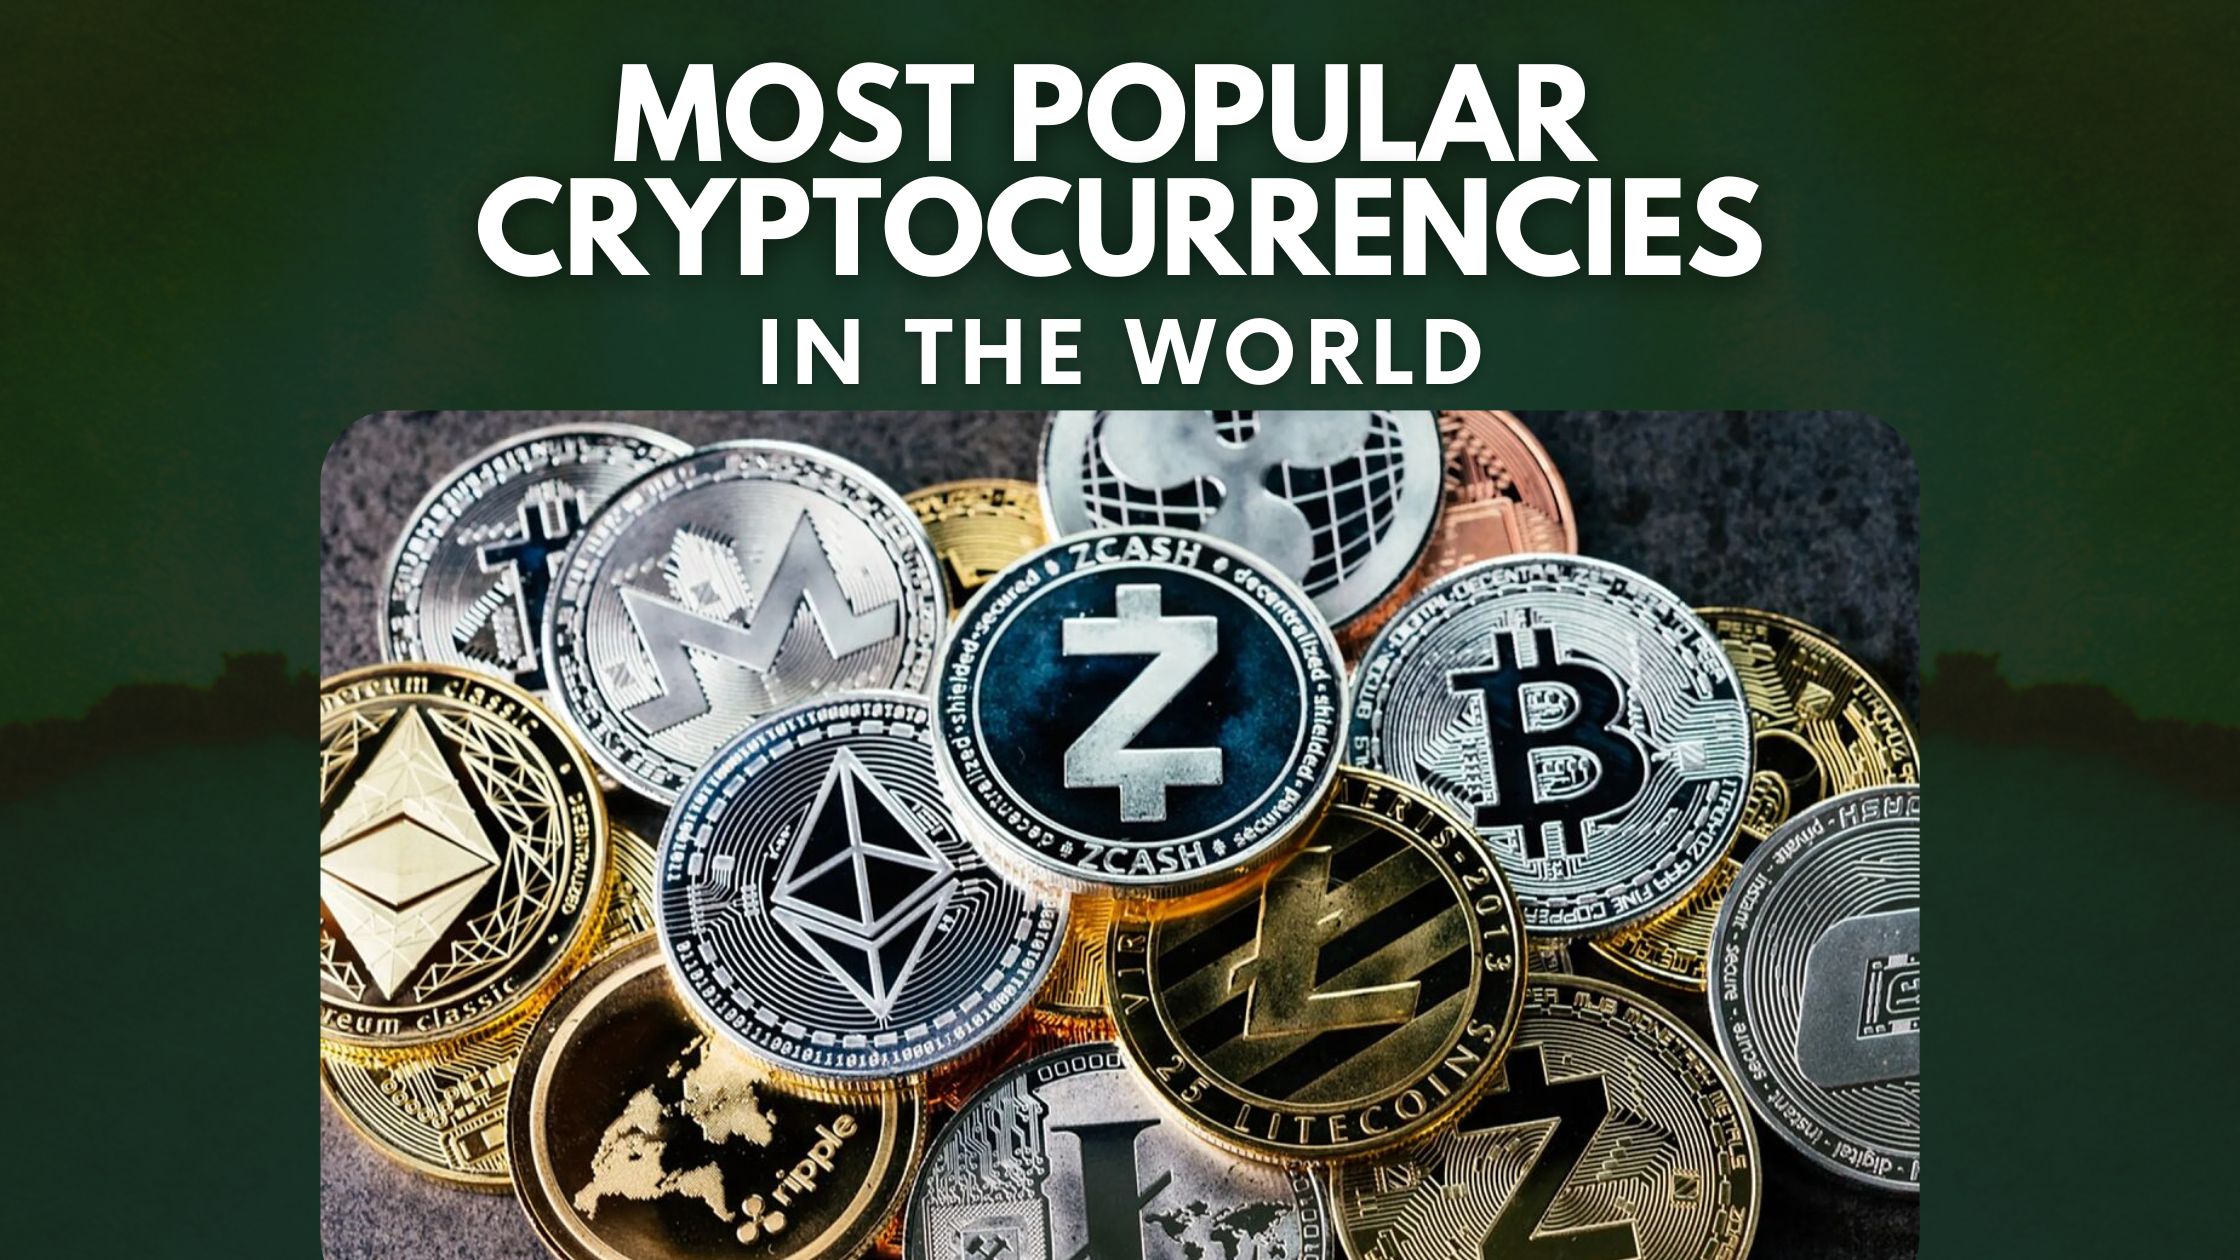 Top 10 Most Popular Cryptocurrencies In The World (2022)